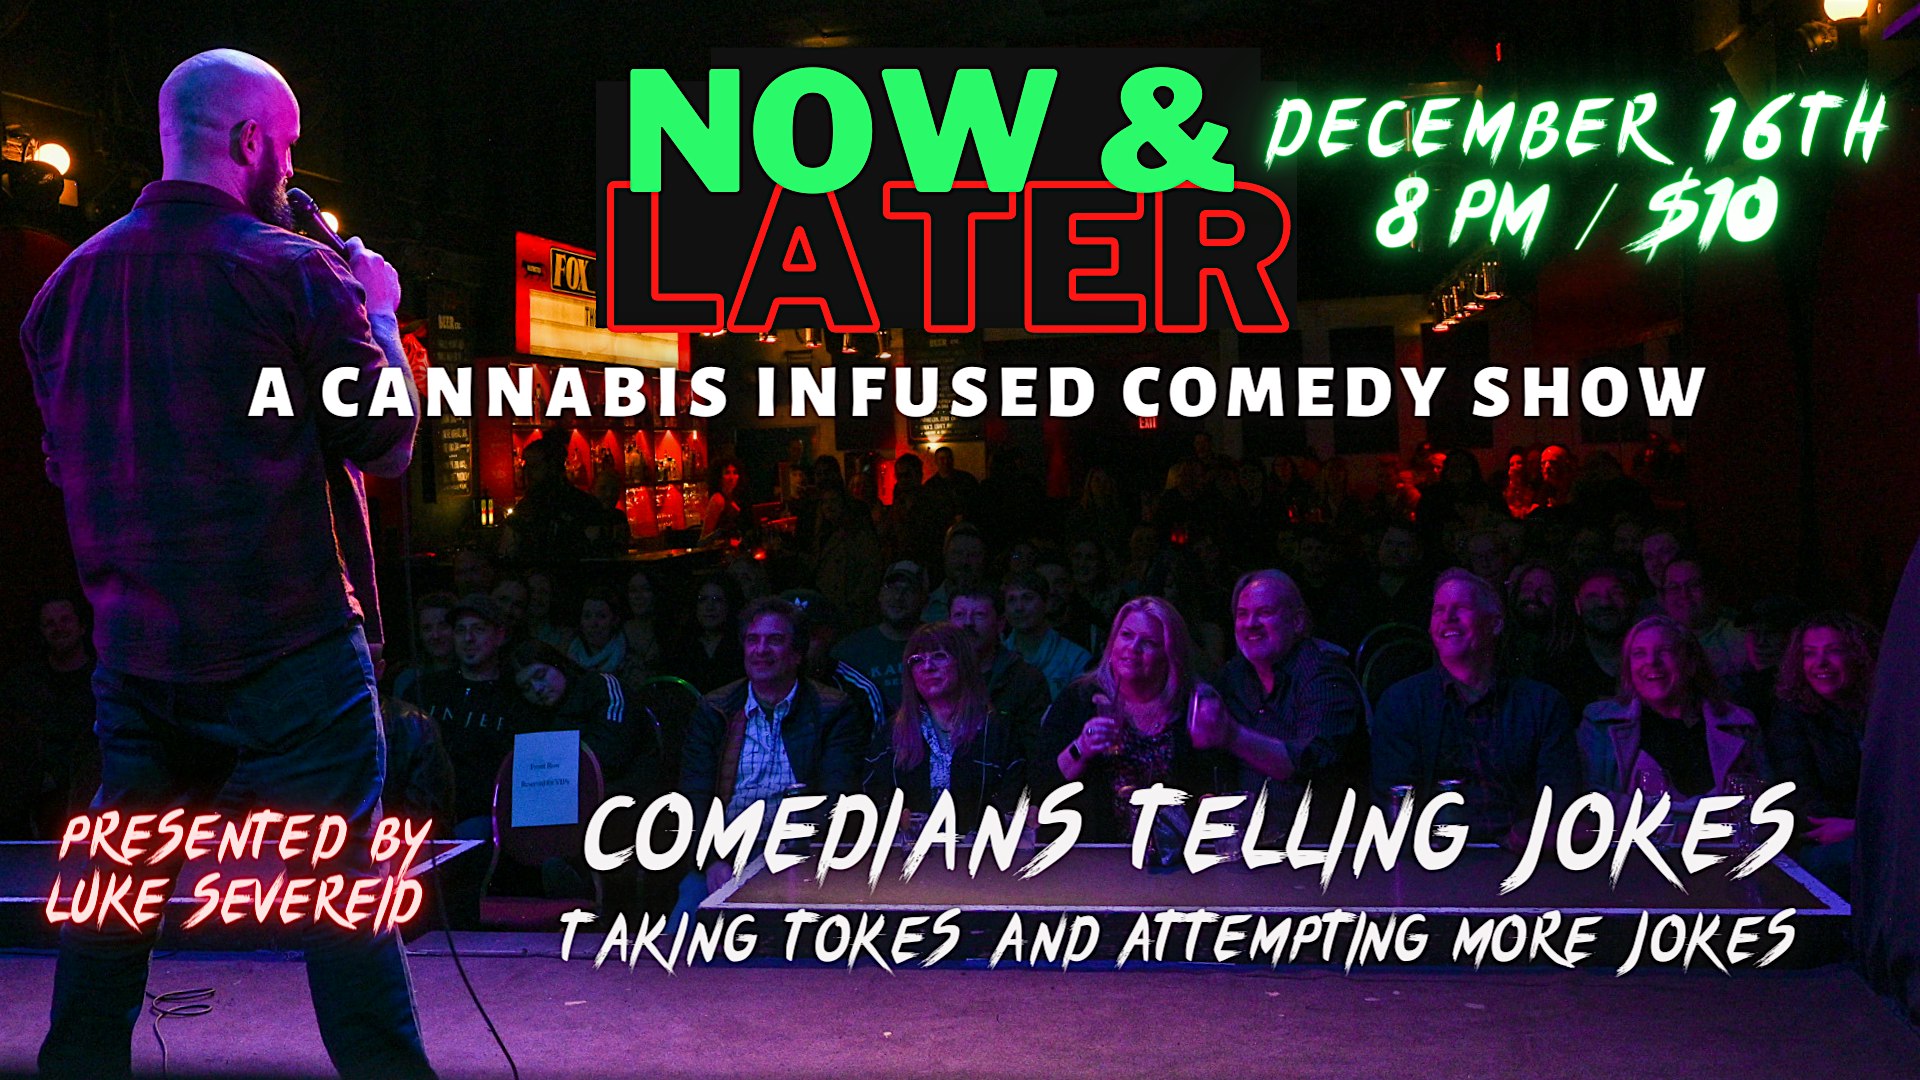 Now &amp; Later / A Cannabis Infused Comedy Experience December 16th @ 8 PM